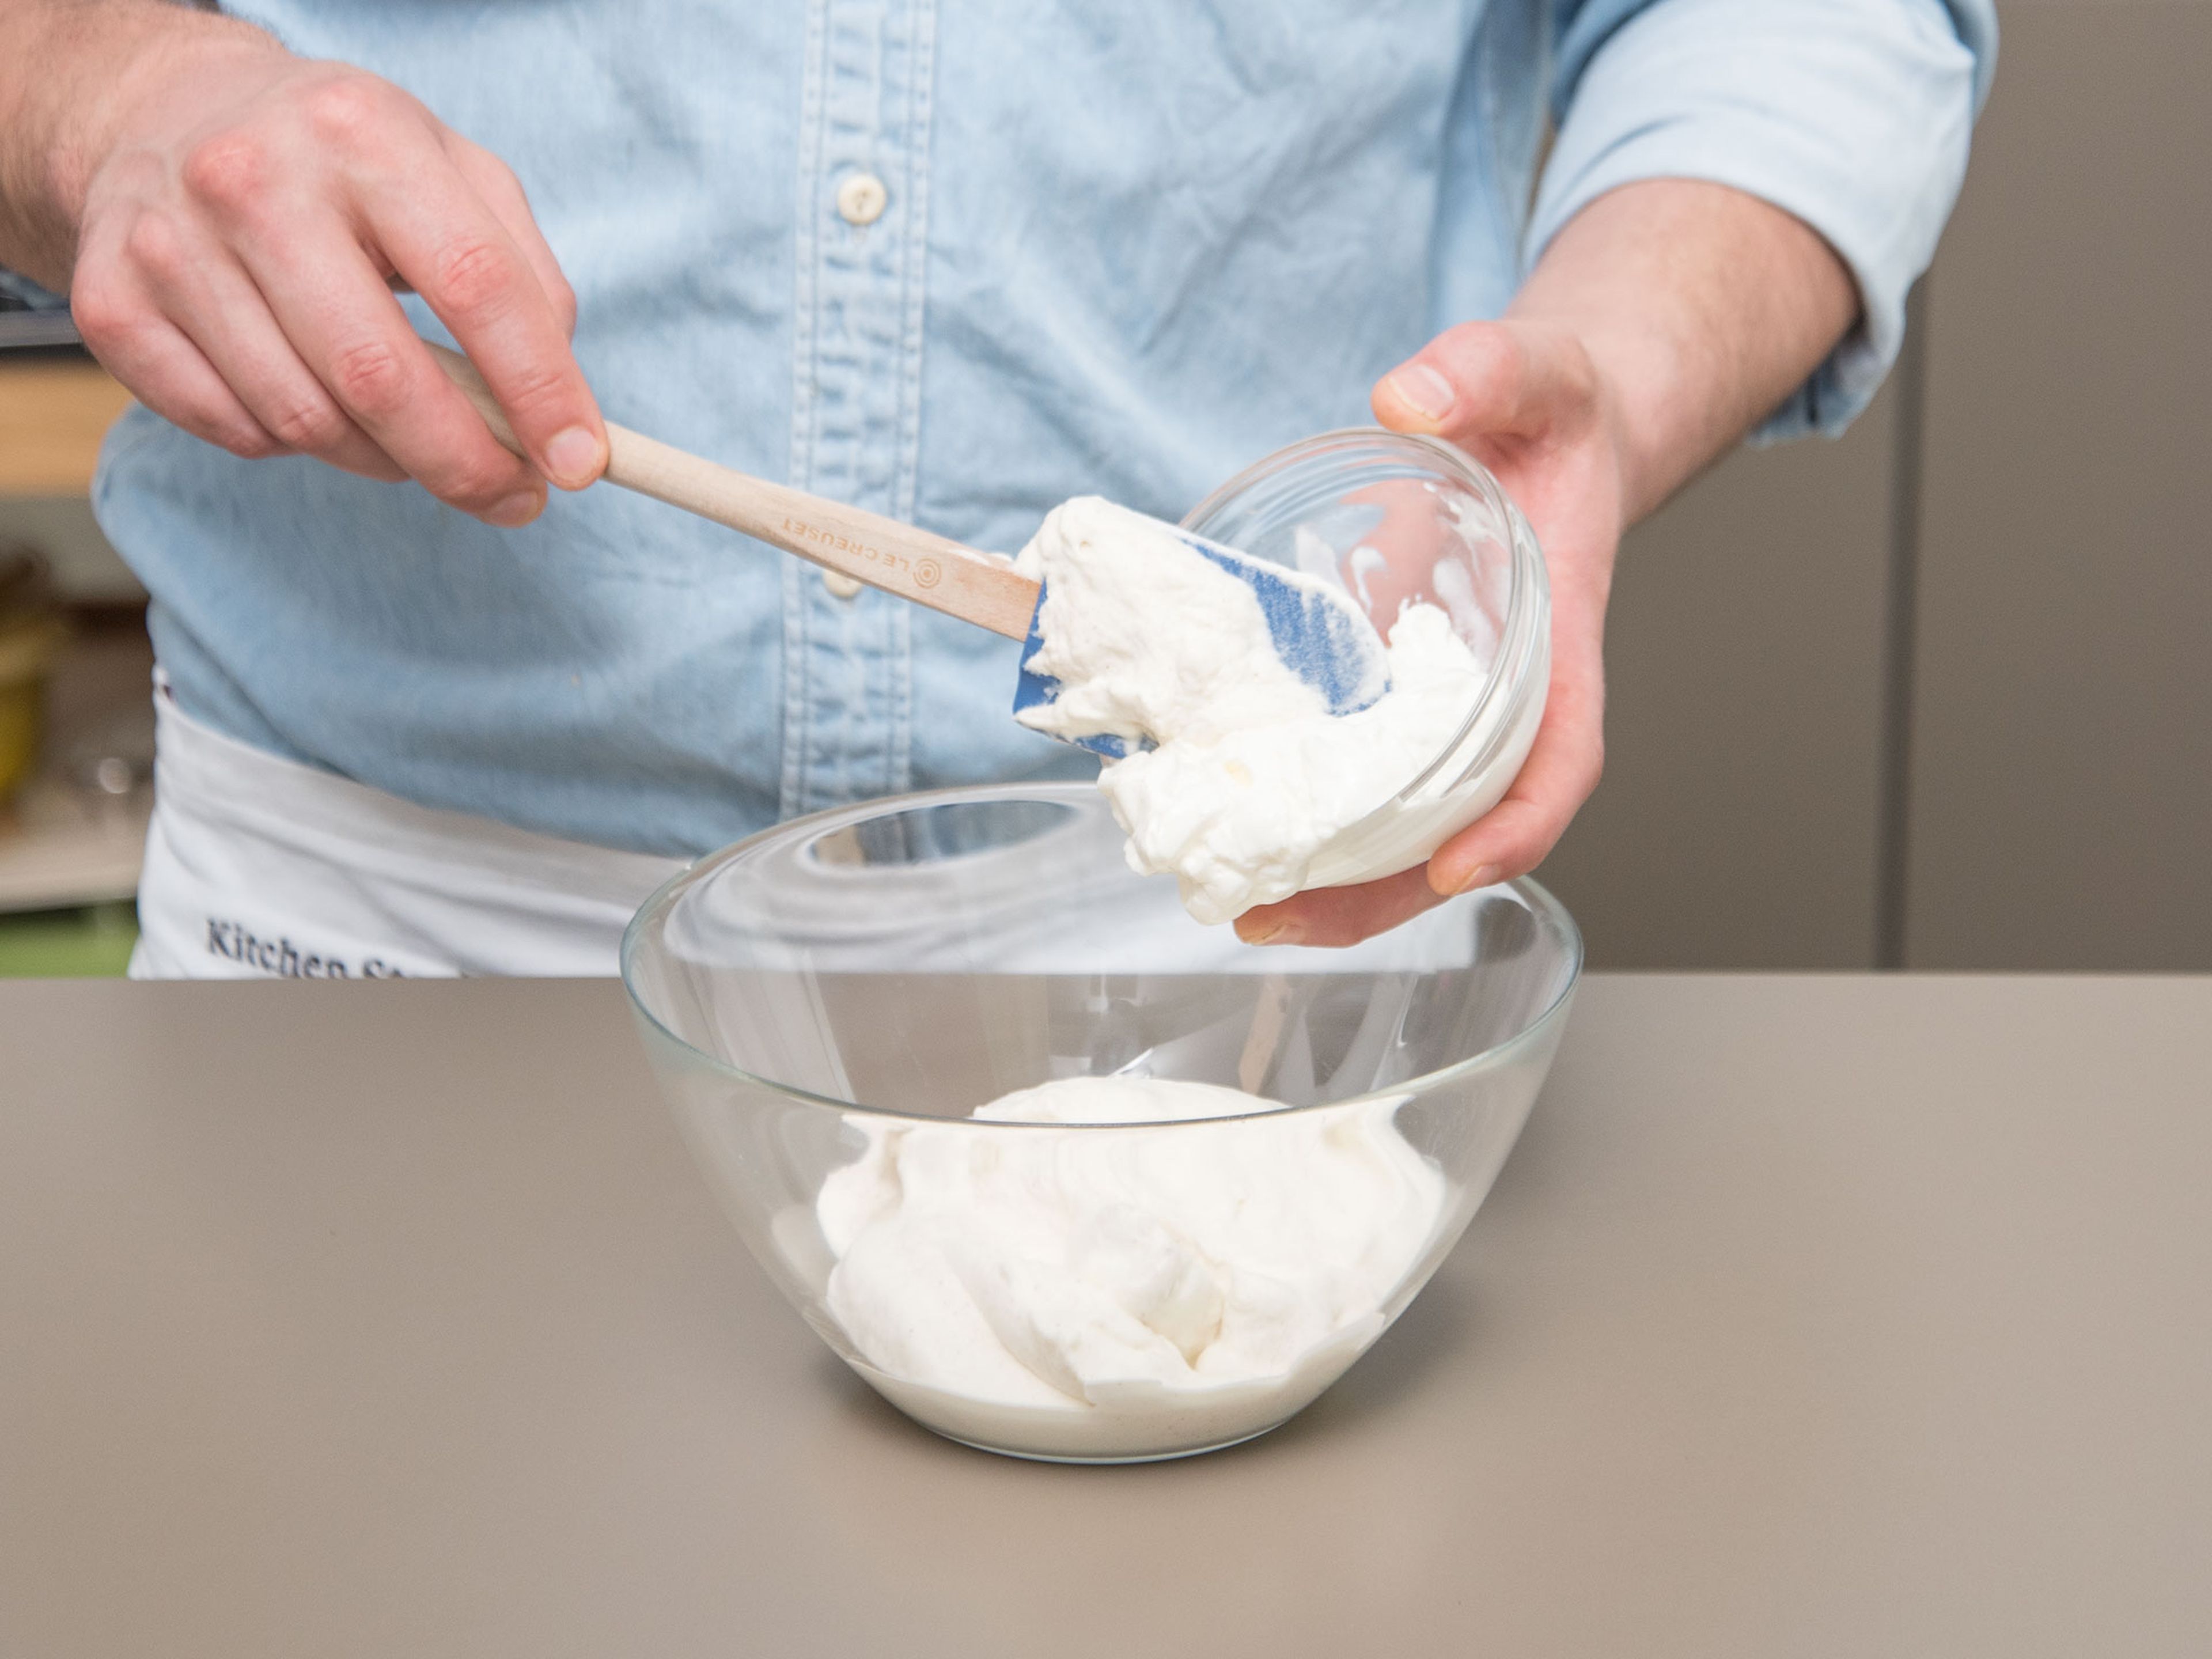 Add cream to mixing bowl and beat with a stand mixer or hand mixer until soft peaks form. Add vanilla sugar, then beat until stiff peaks form. Carefully fold in yogurt.